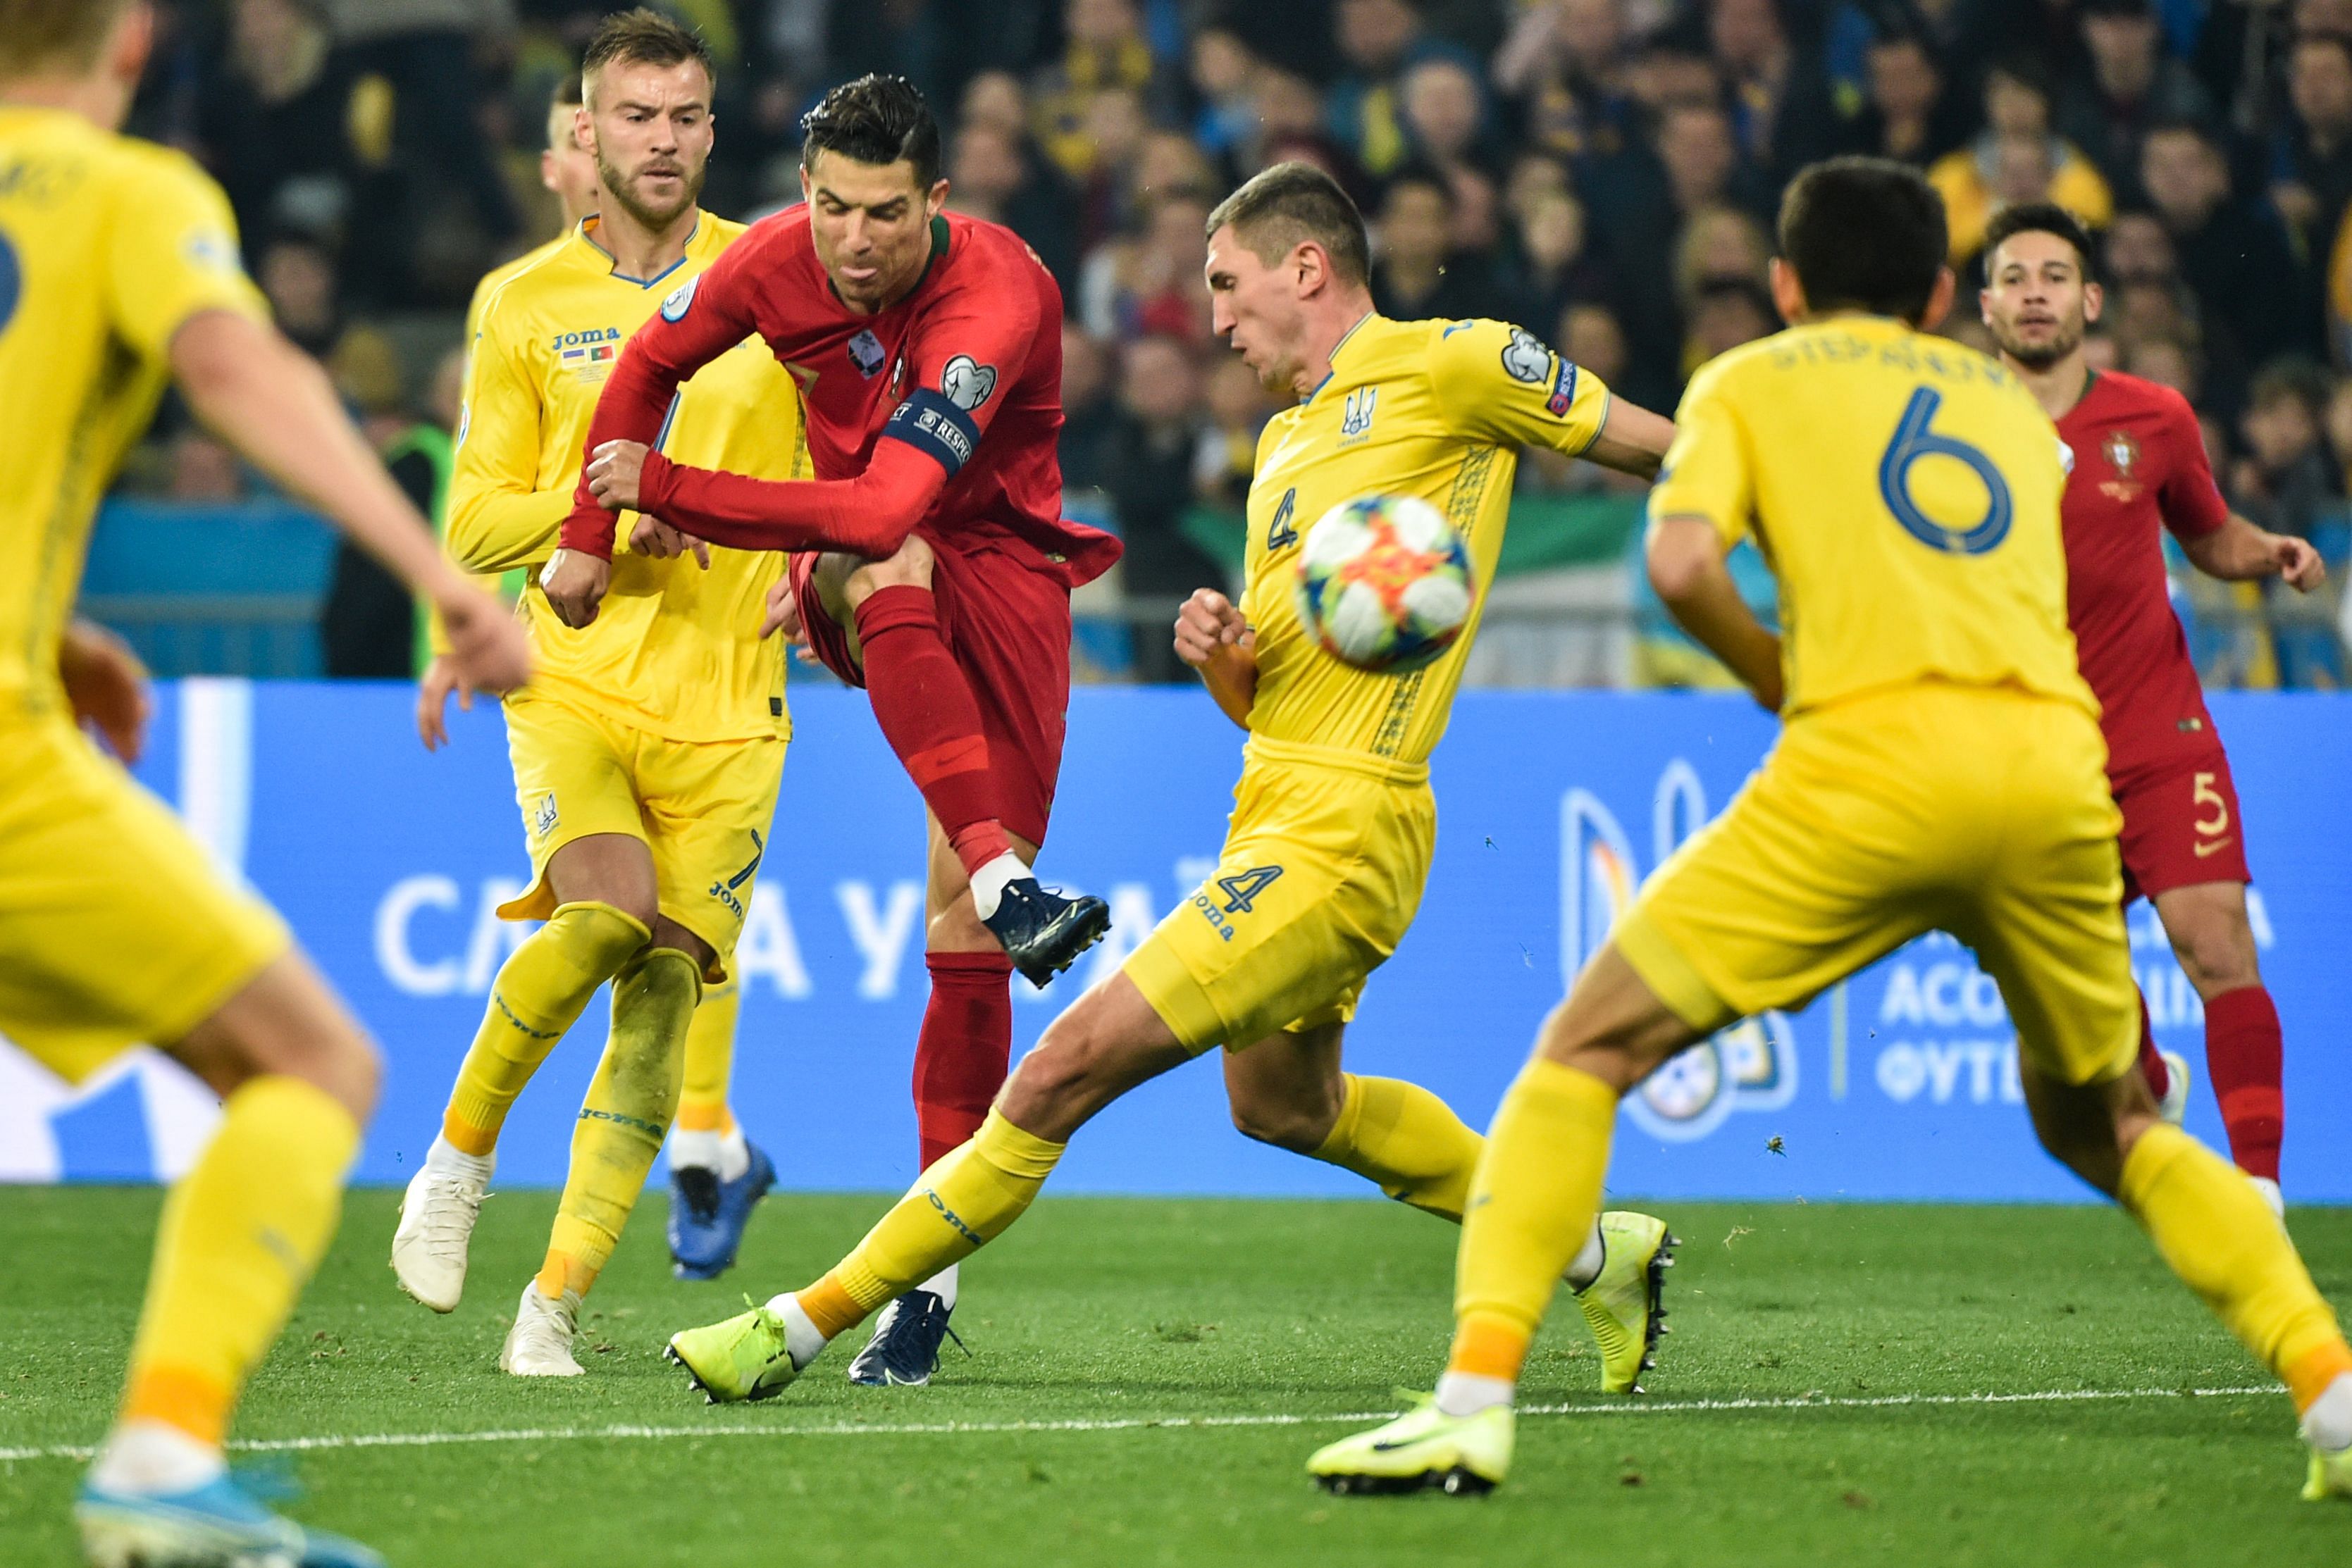 Portugal's forward Cristiano Ronaldo kicks the ball during the Euro 2020 football qualification match between Ukraine and Portugal at the NSK Olimpiyskyi stadium in Kiev. (AFP Photo)